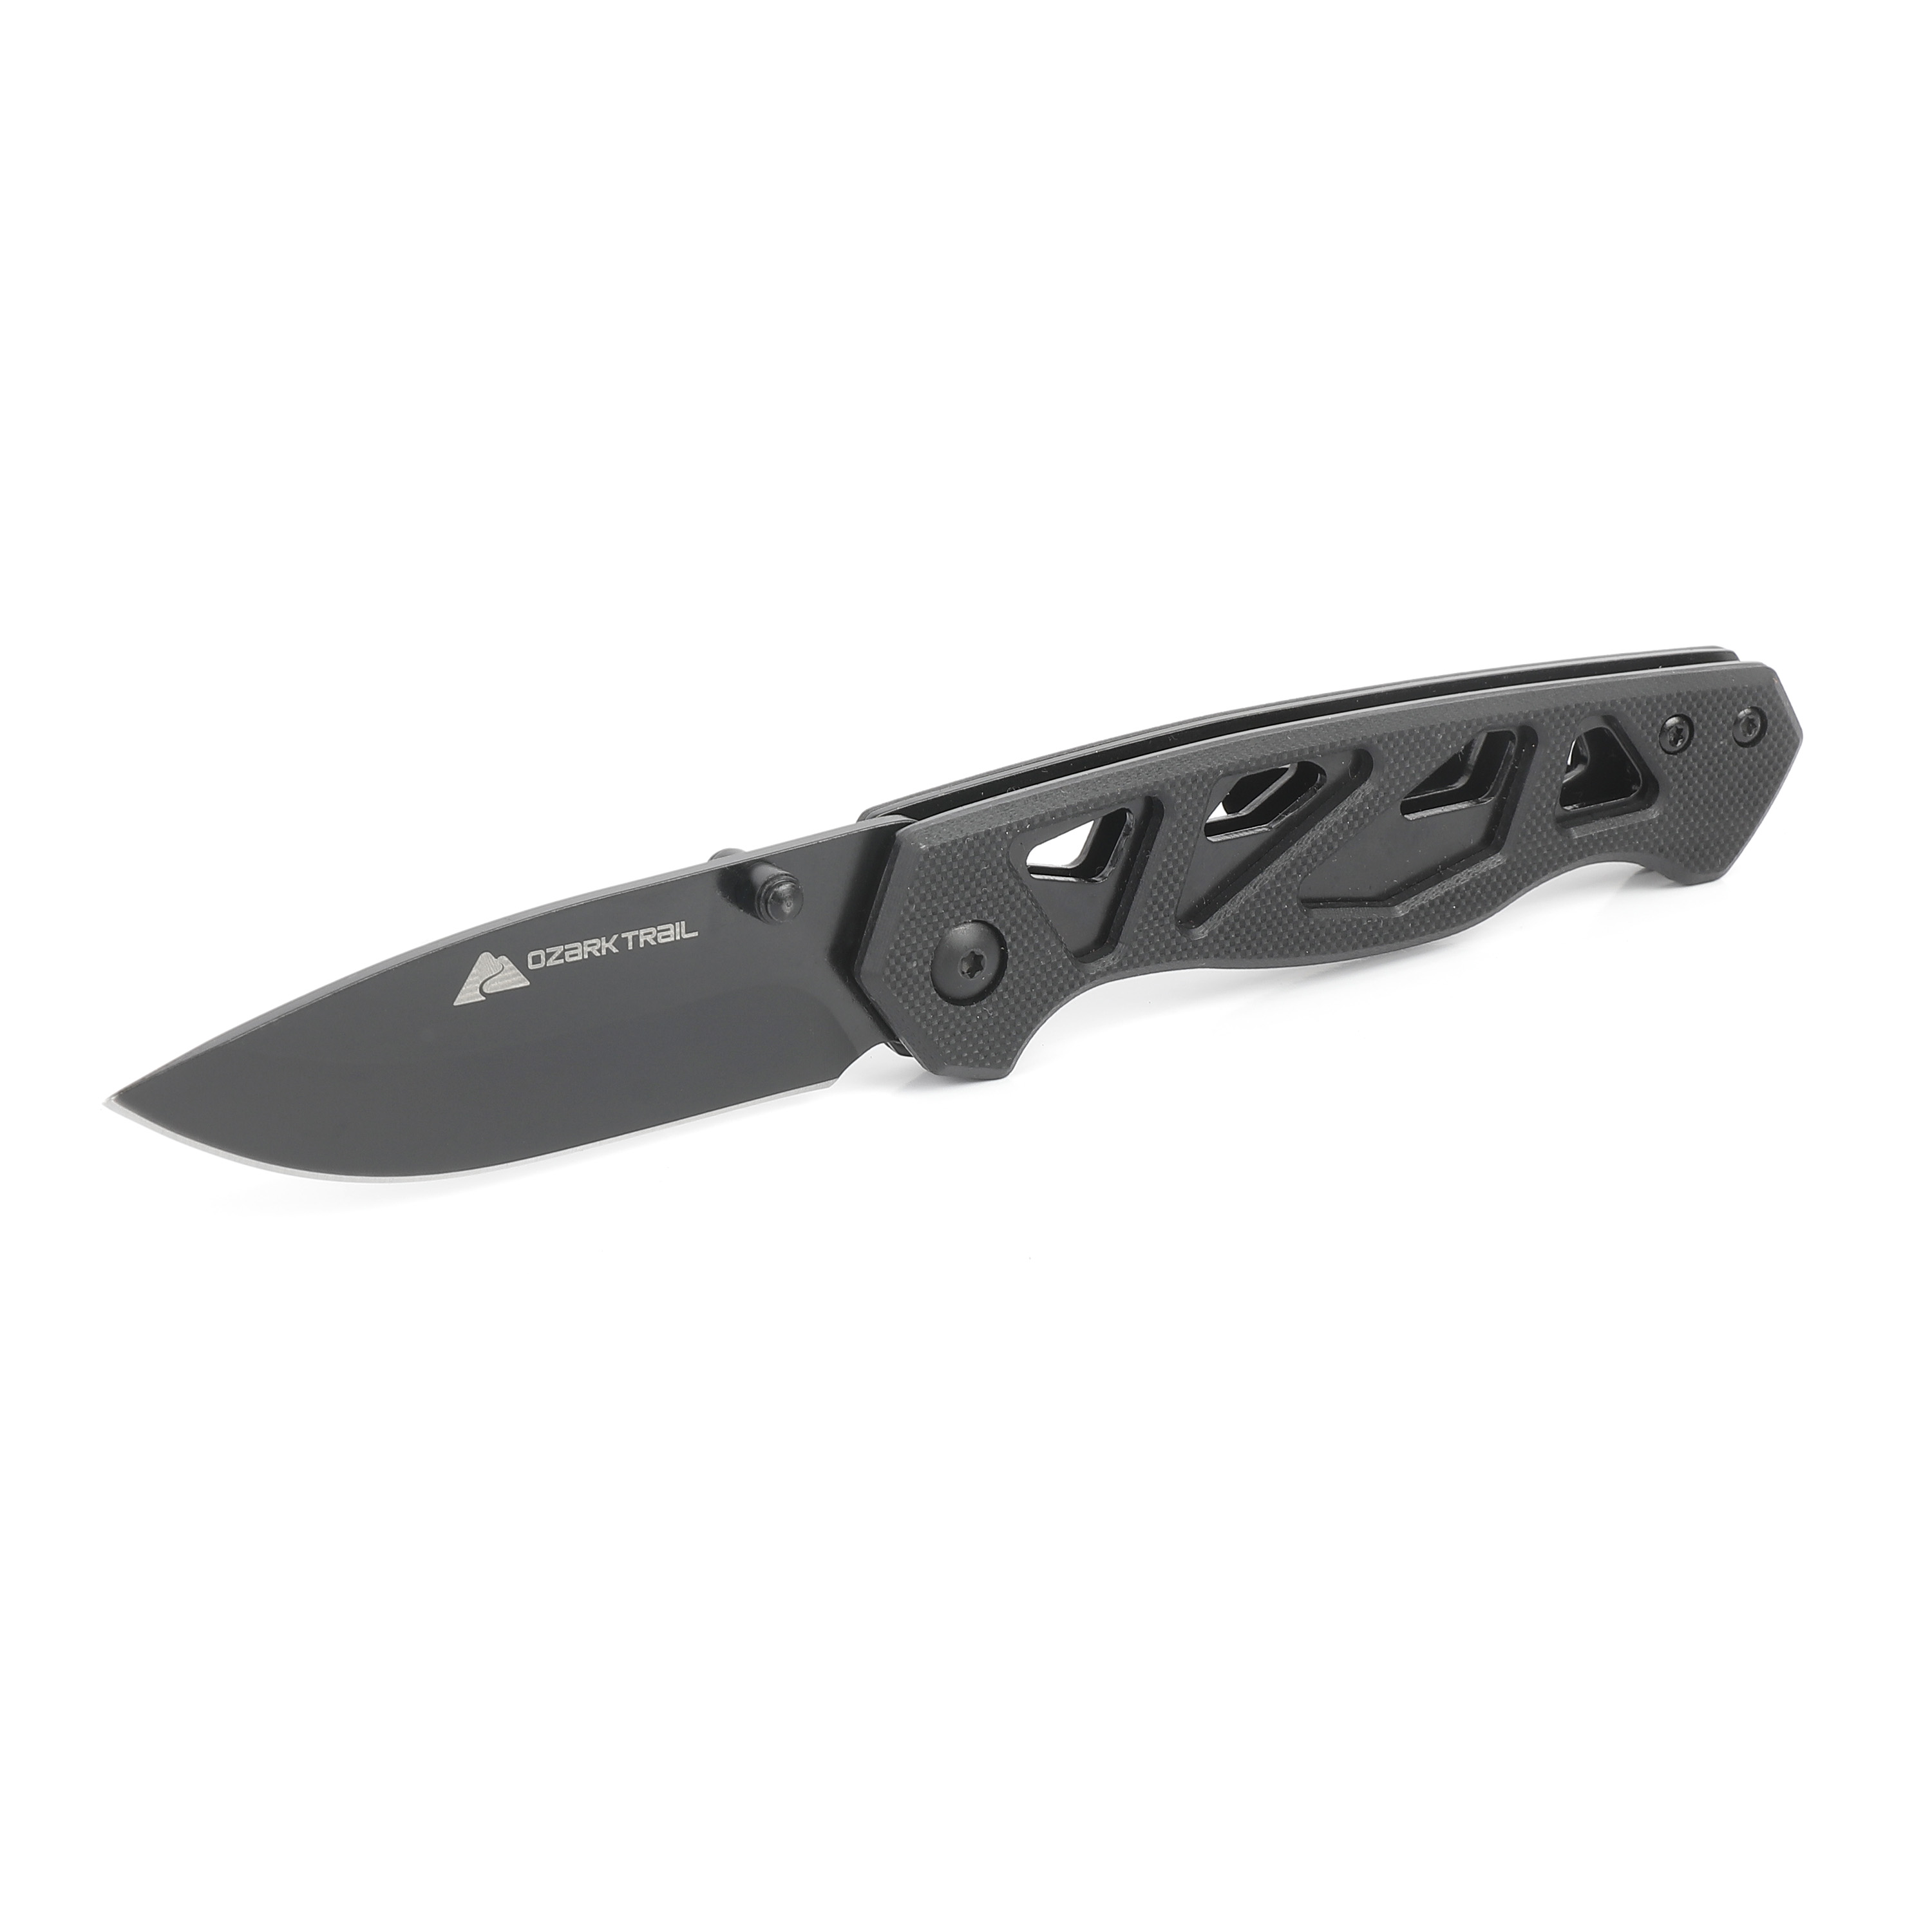 Ozark Trail 7 Stainless Steel Folding Drop Point Blade Pocket Knife, with  Pocket Clip 